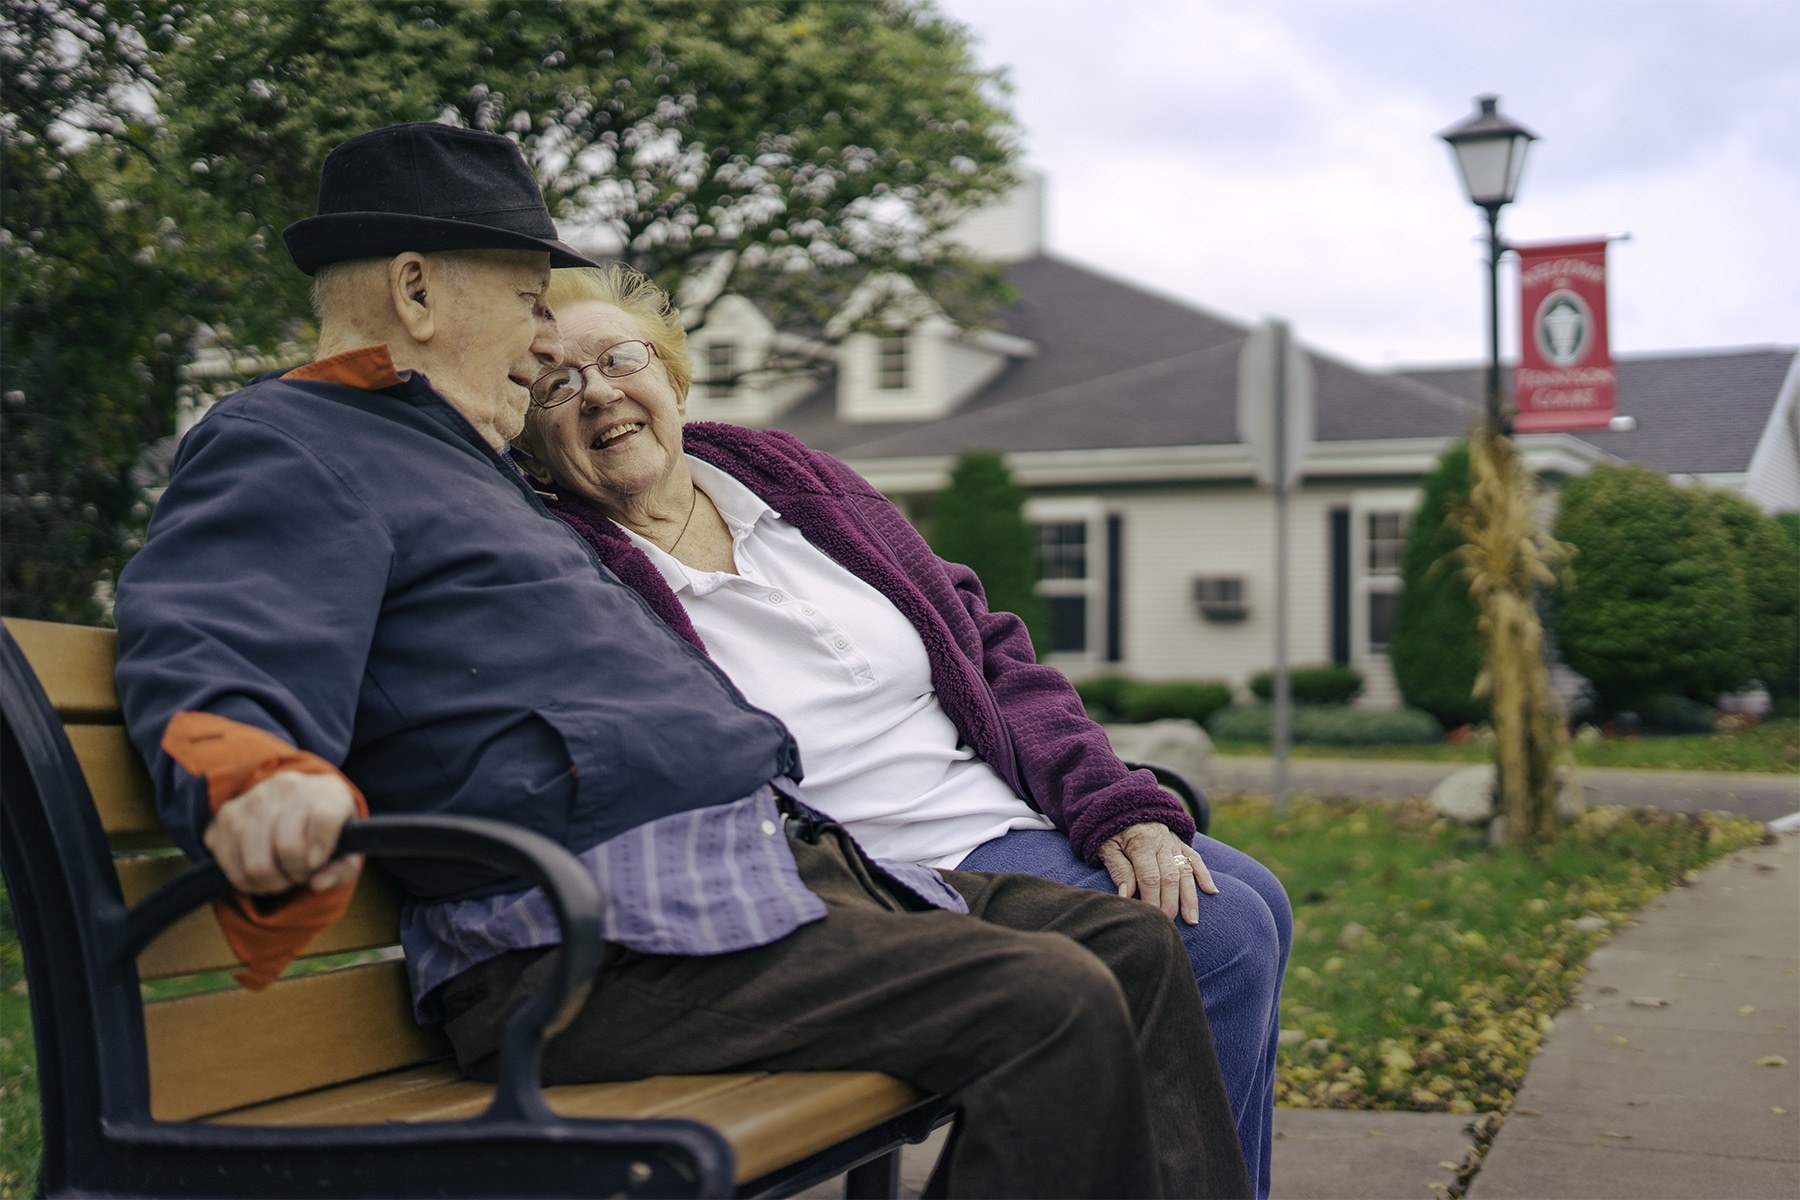 Elderly couple sitting on a bench in a respite care community